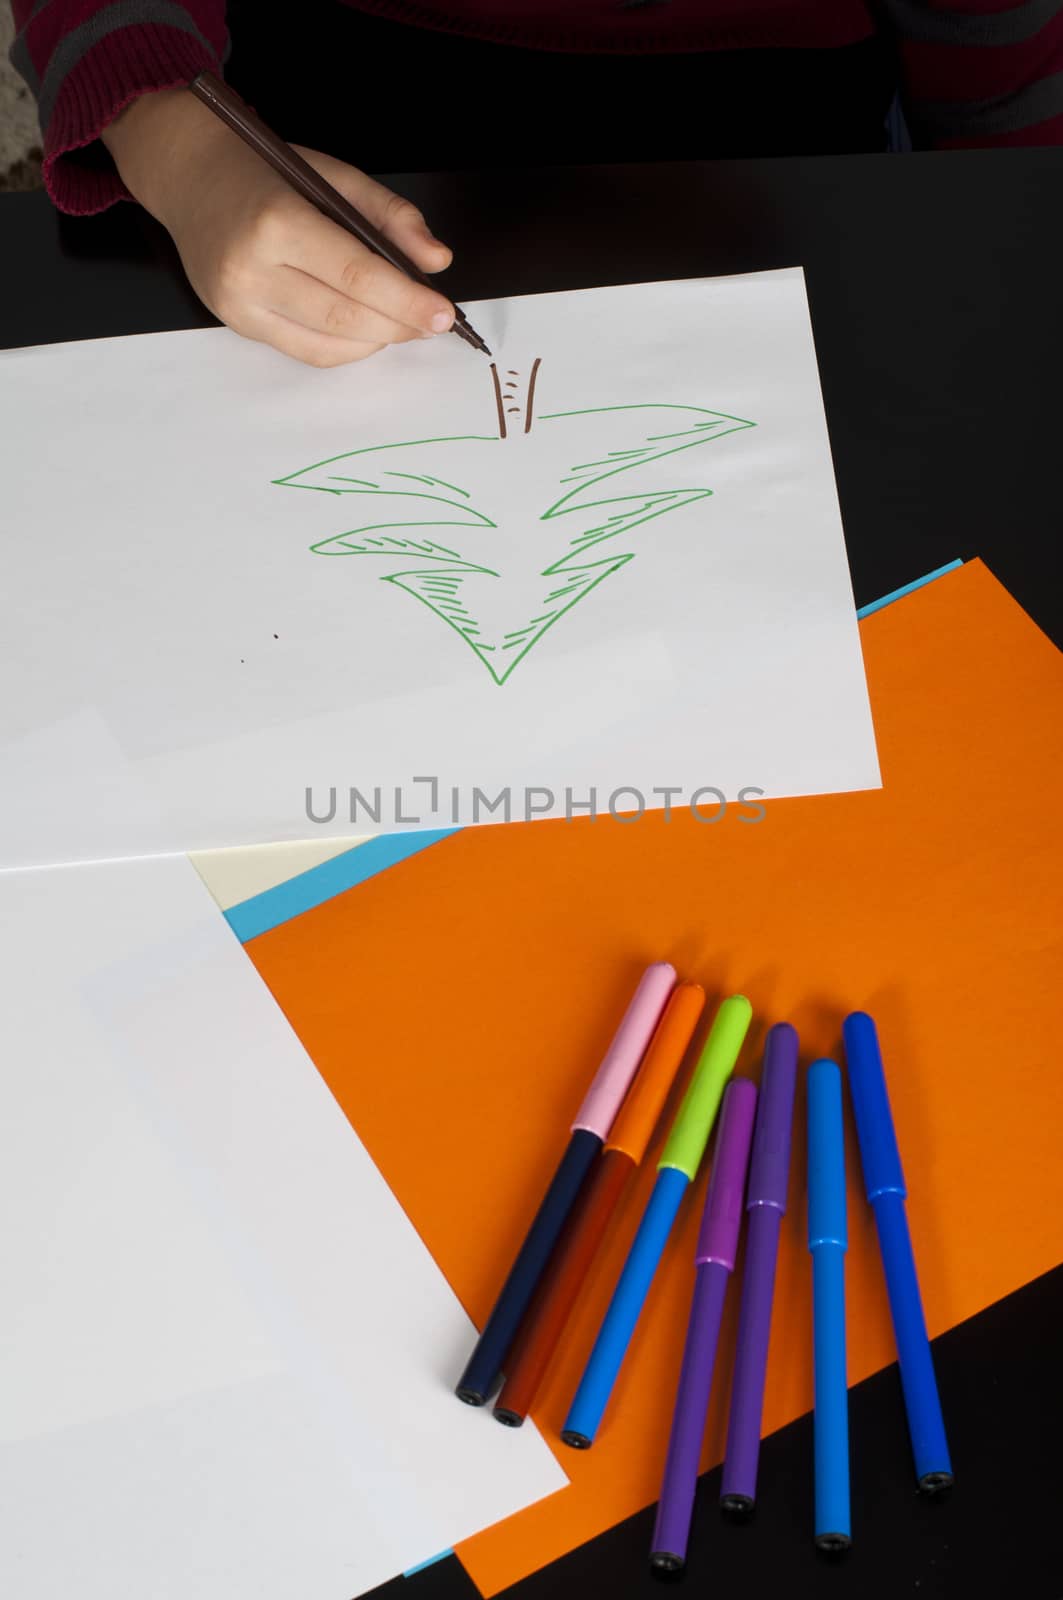 Boy drawing with markers. Multicolored papers